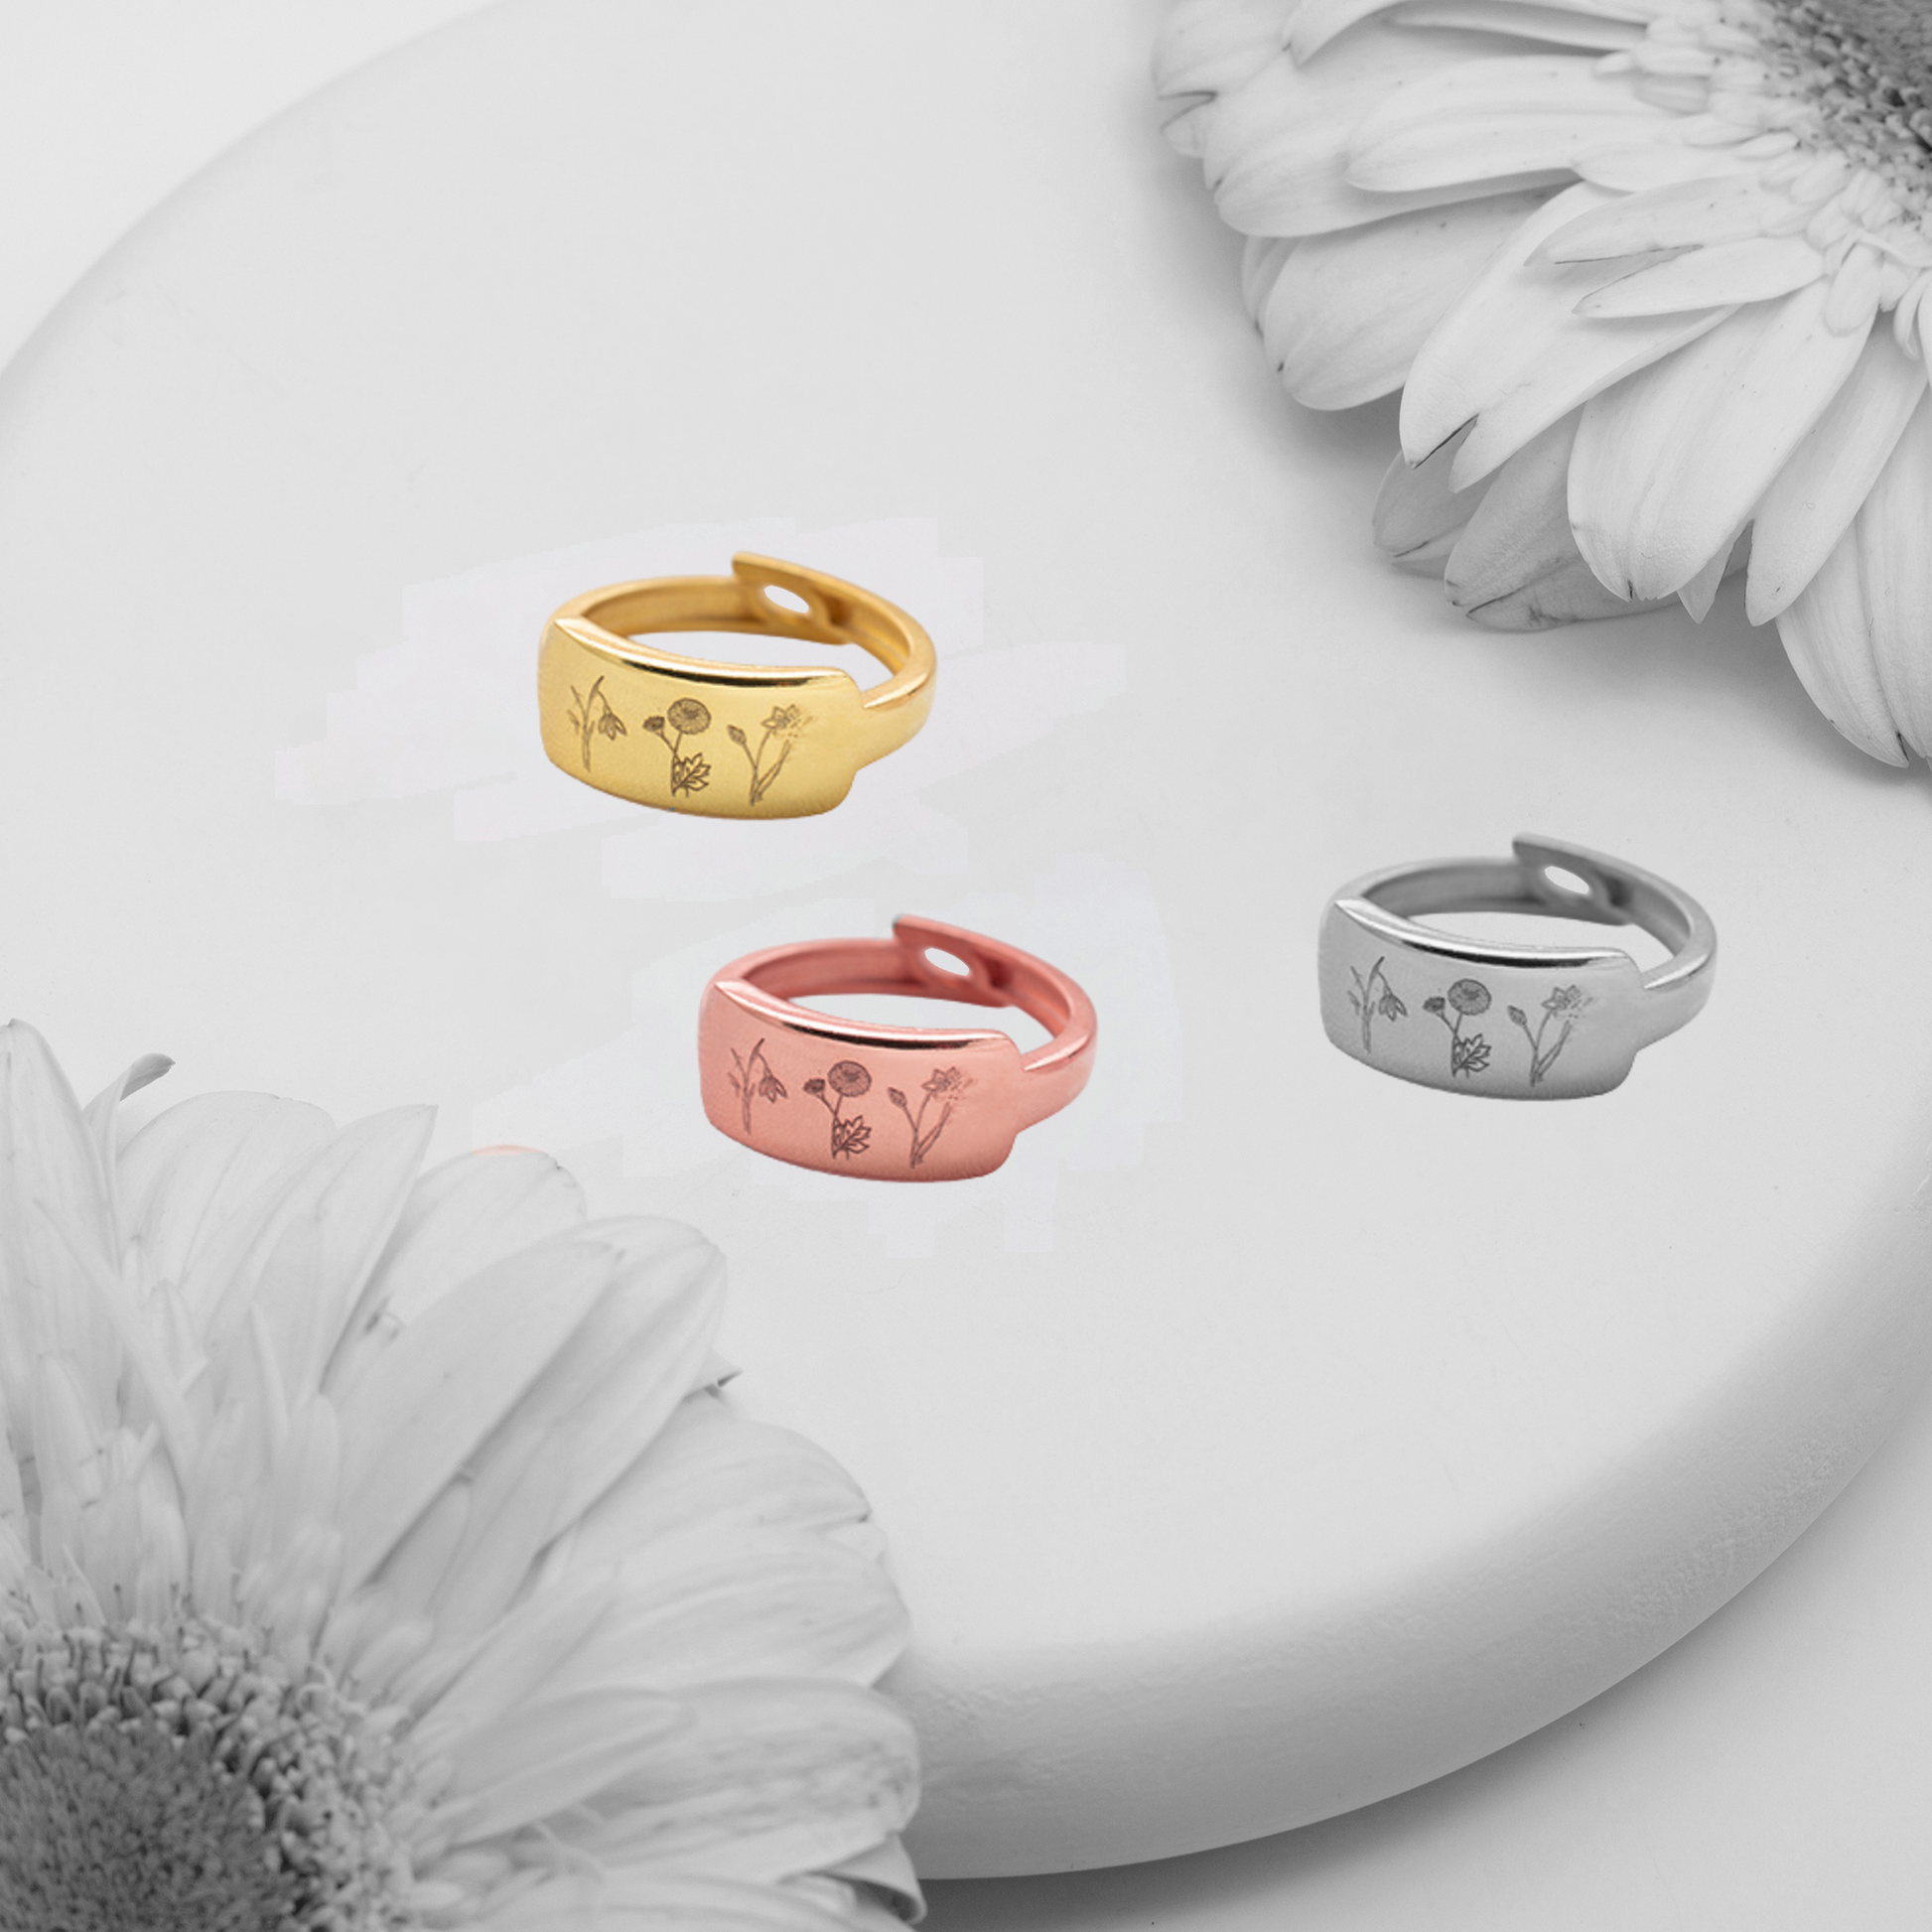 Birth Flower Ring, Floral Ring, Bridesmaid Gift, Family Florals Ring, Multiple Birth Flower Ring, Sterling Silver Mom Ring, Gold Signet Ring - Geniune Jewellery